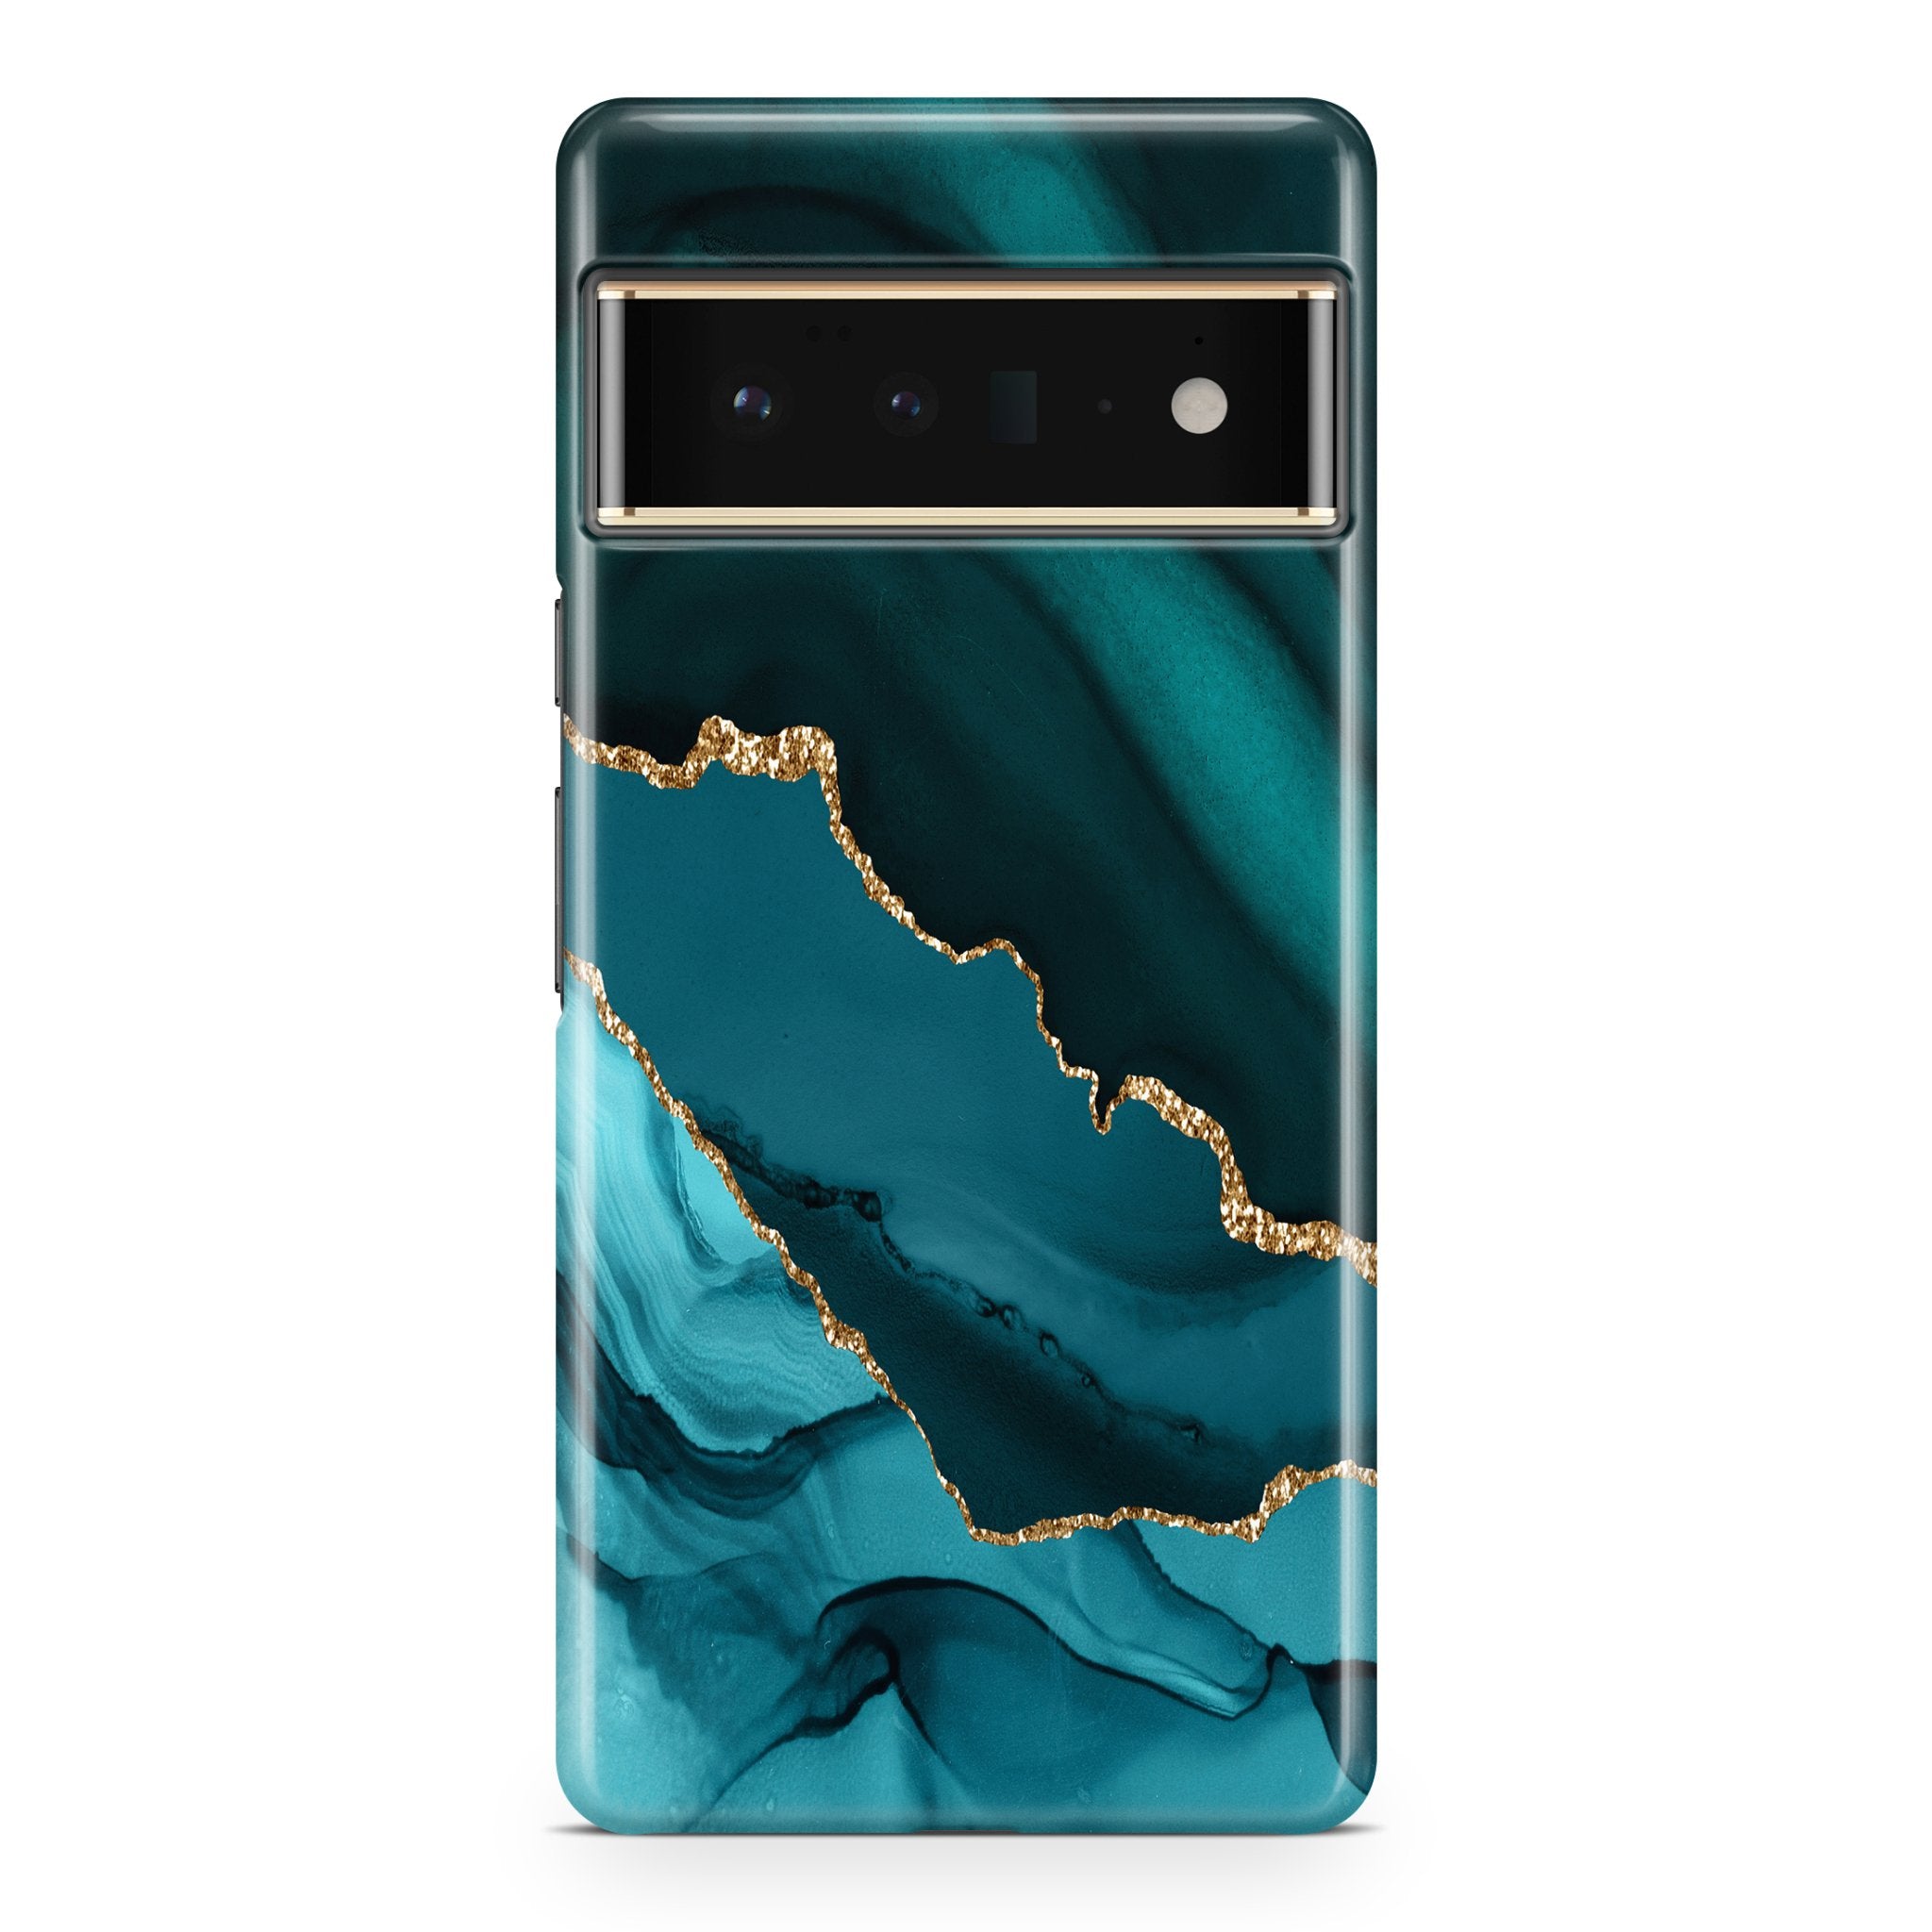 Teal Elegance I - Google phone case designs by CaseSwagger